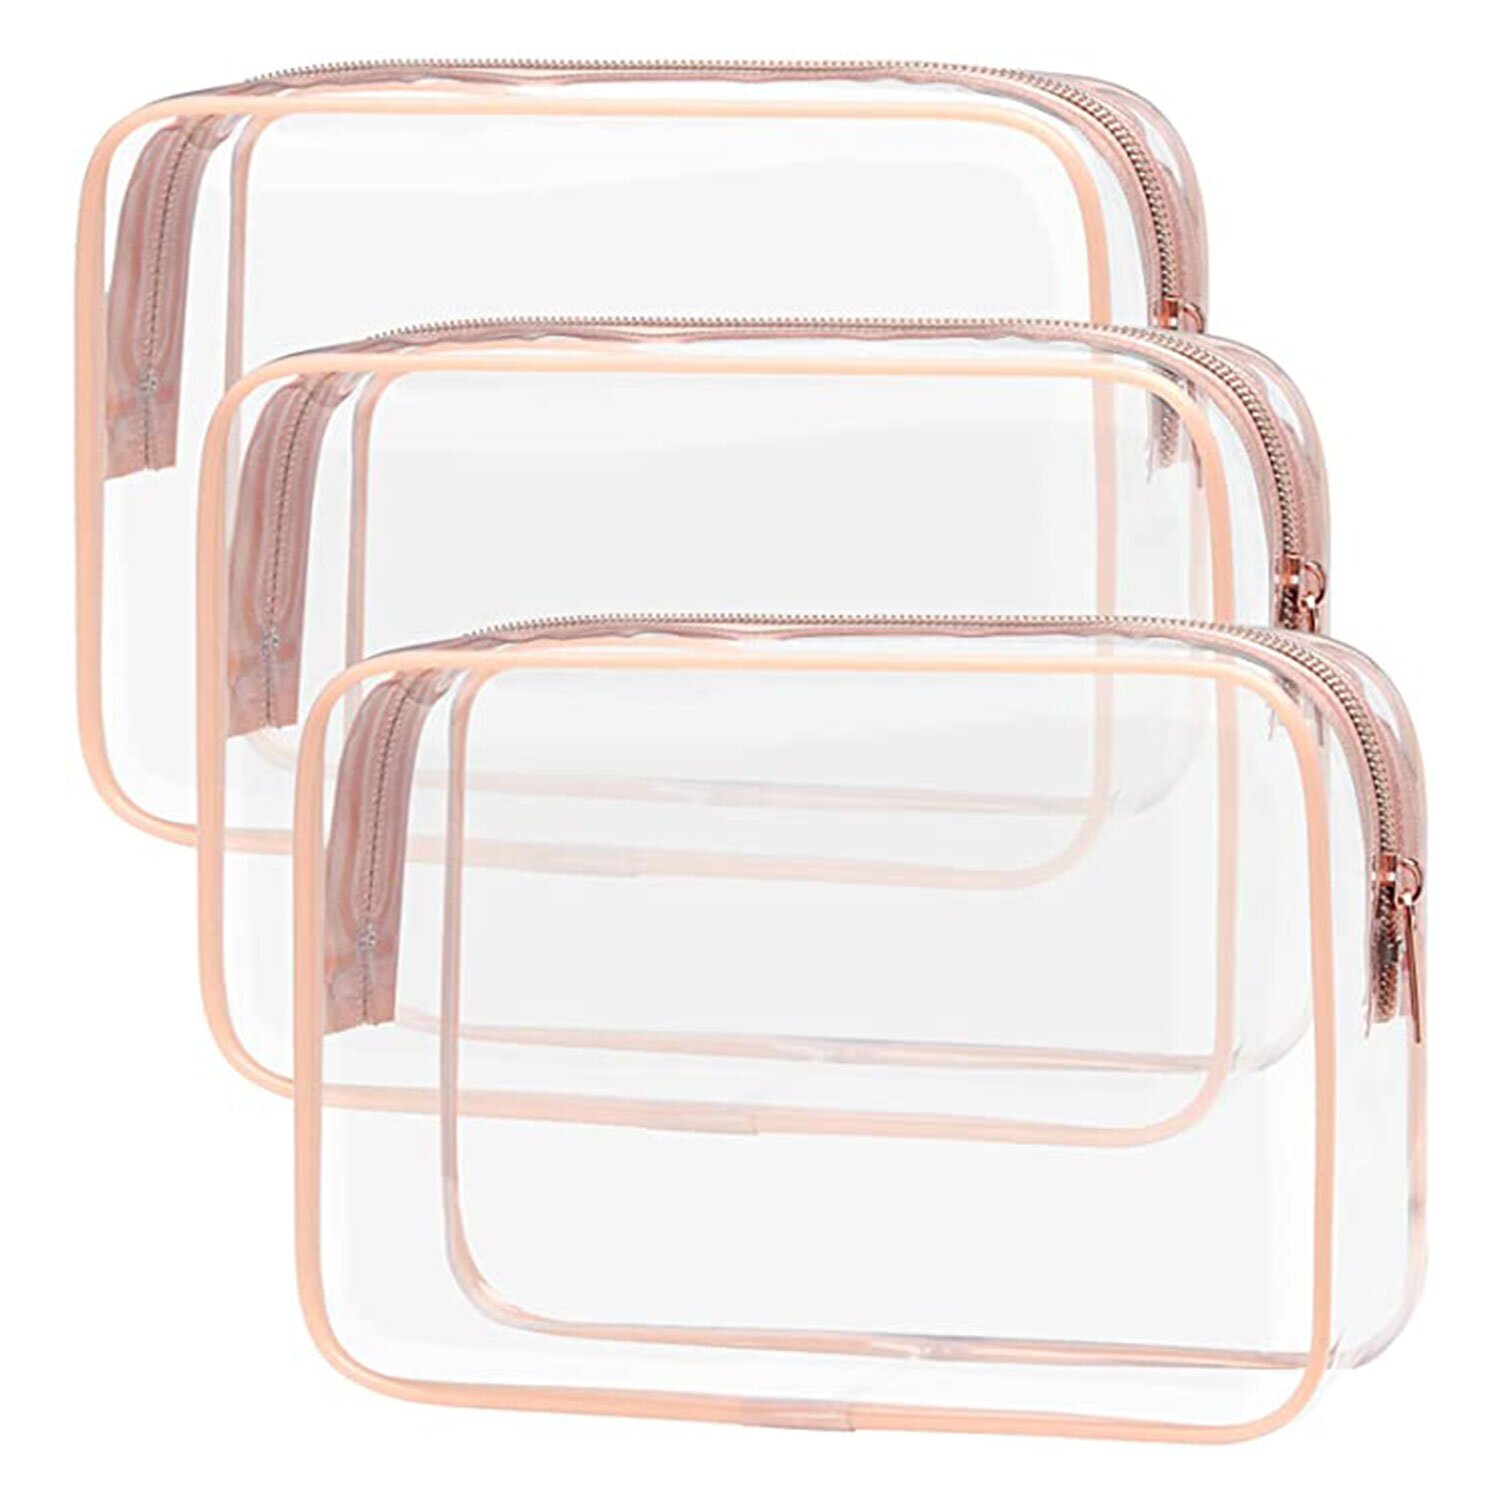 Packism Clear Toiletry Bags